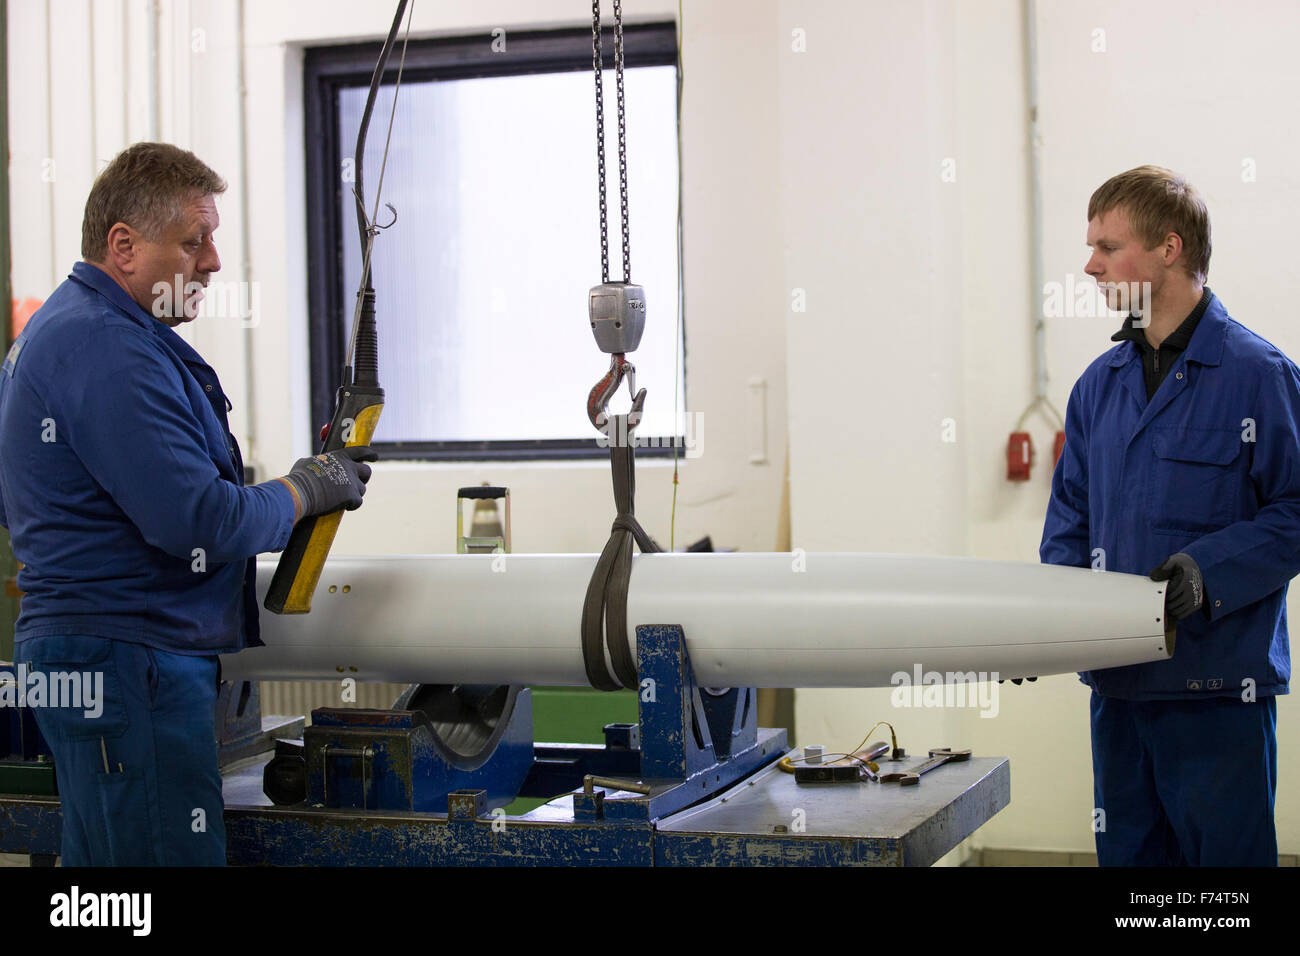 HANDOUT - A handout picture made available on 25 November 2015 by the German armed forces (Bundeswehr) shows employees of the company Nammo Buck GmbH working on the munition of a M26 MLRS multiple missile launcher in Pinnow, Germany, 25 November 2015. Some 25 years after the end of the Cold War, the last batch of cluster munition of the German armed forces has been dismantled. Employees of a munitions disposal company disassembled the remaining missiles in Pinnow. Photo: JANA NEUMANN/Bundeswehr (ATTENTION EDITORS: FOR EDITORIAL USE ONLY IN CONNECTION WITH CURRENT REPORTING/ MANDATORY CREDIT Stock Photo